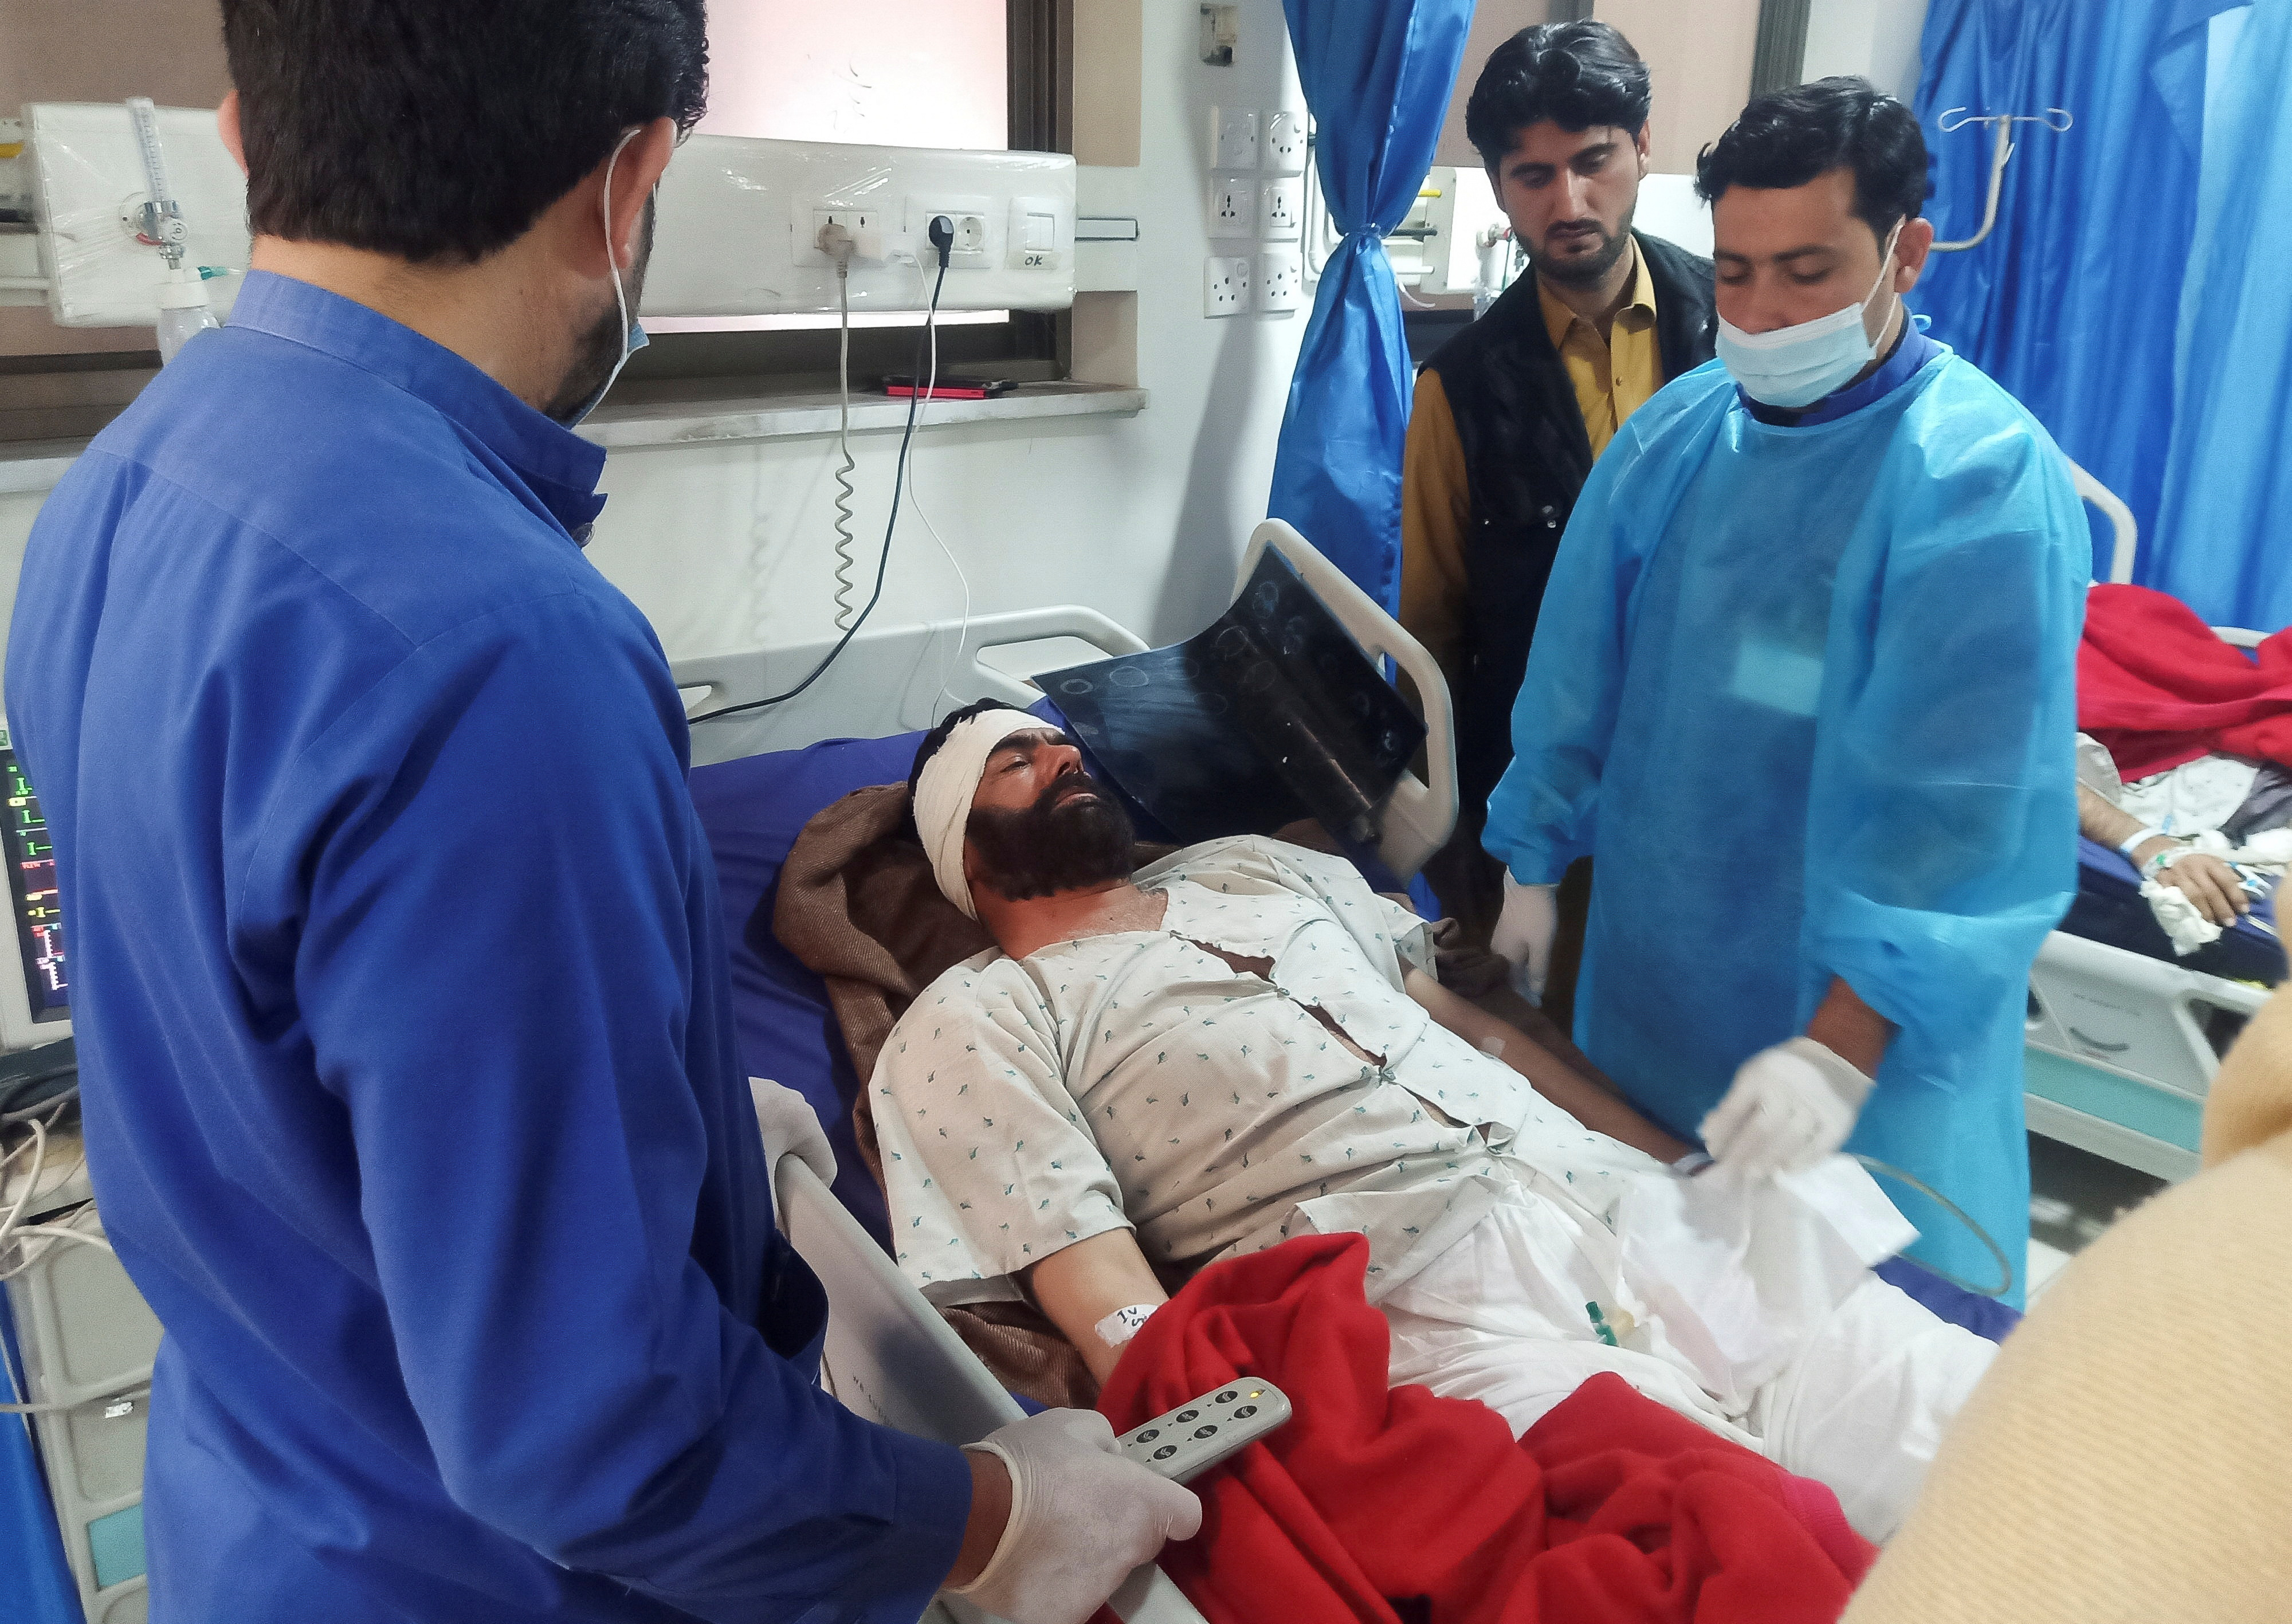 A man, who was injured after a suicide blast in a mosque, receives medical aid at a hospital in Peshawar